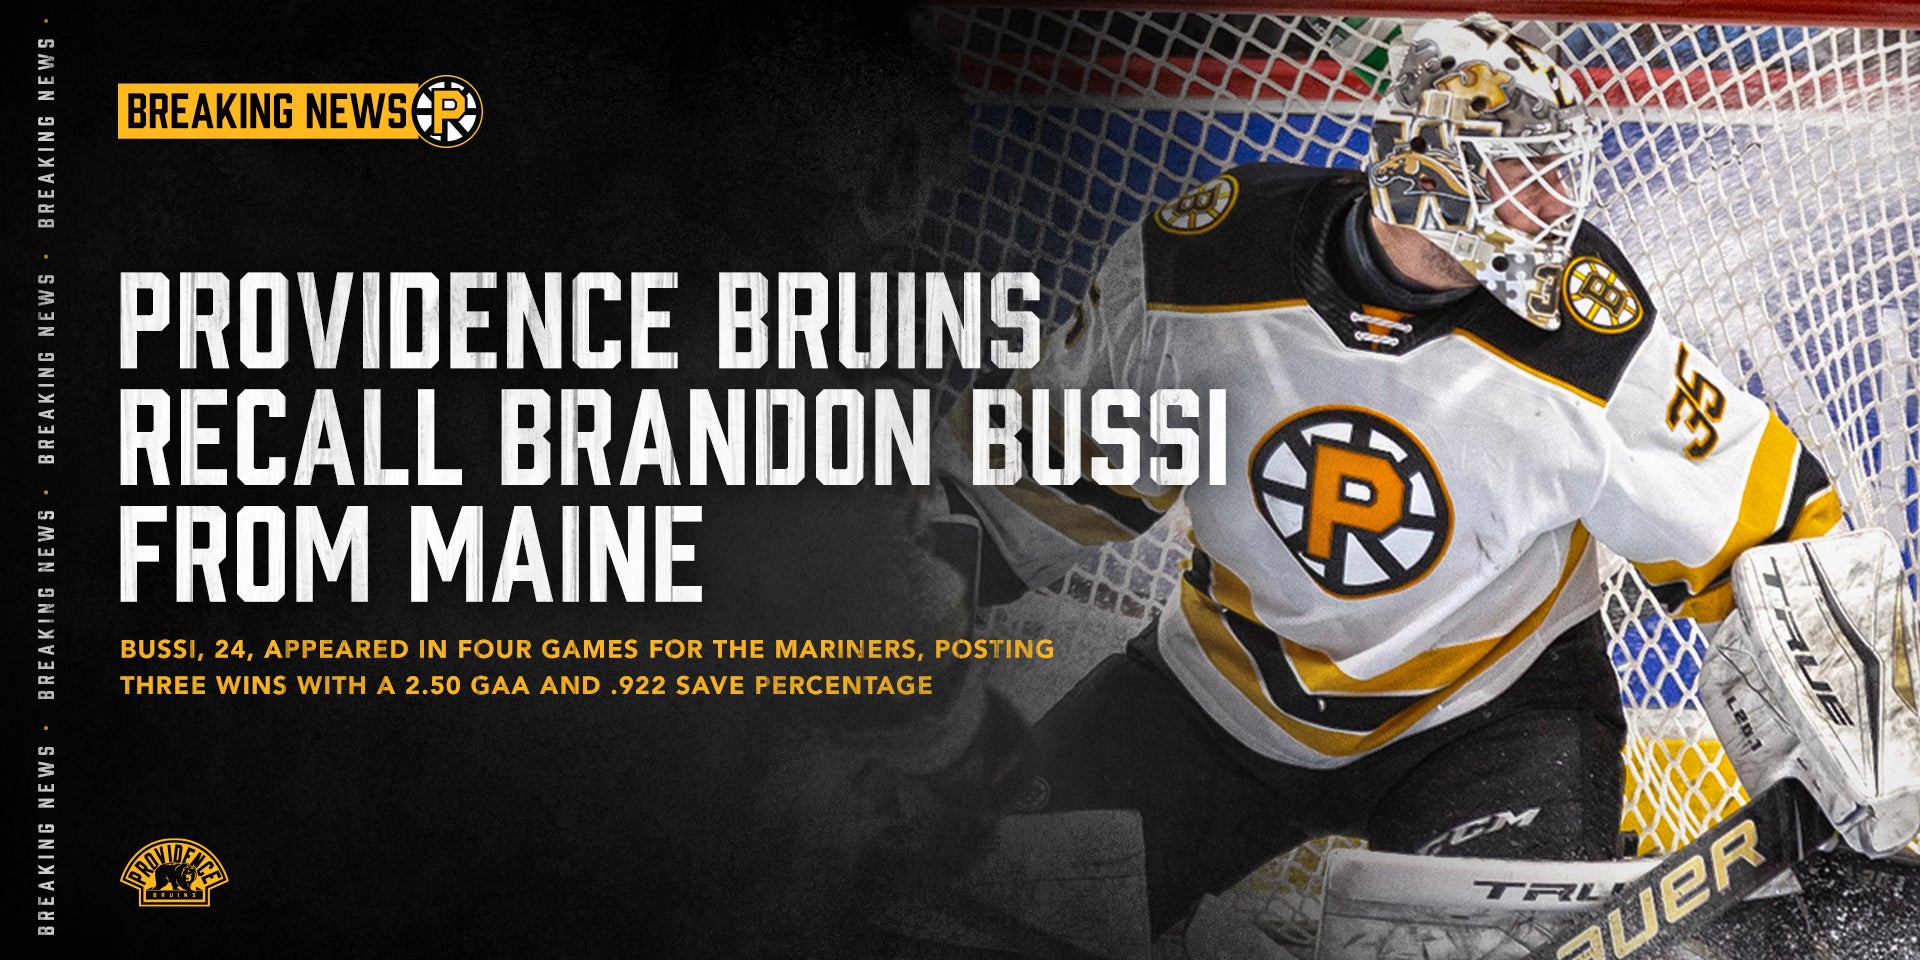 BUSSI'S 40 SAVE EFFORT NOT ENOUGH AS P-BRUINS FALL TO WOLF PACK IN